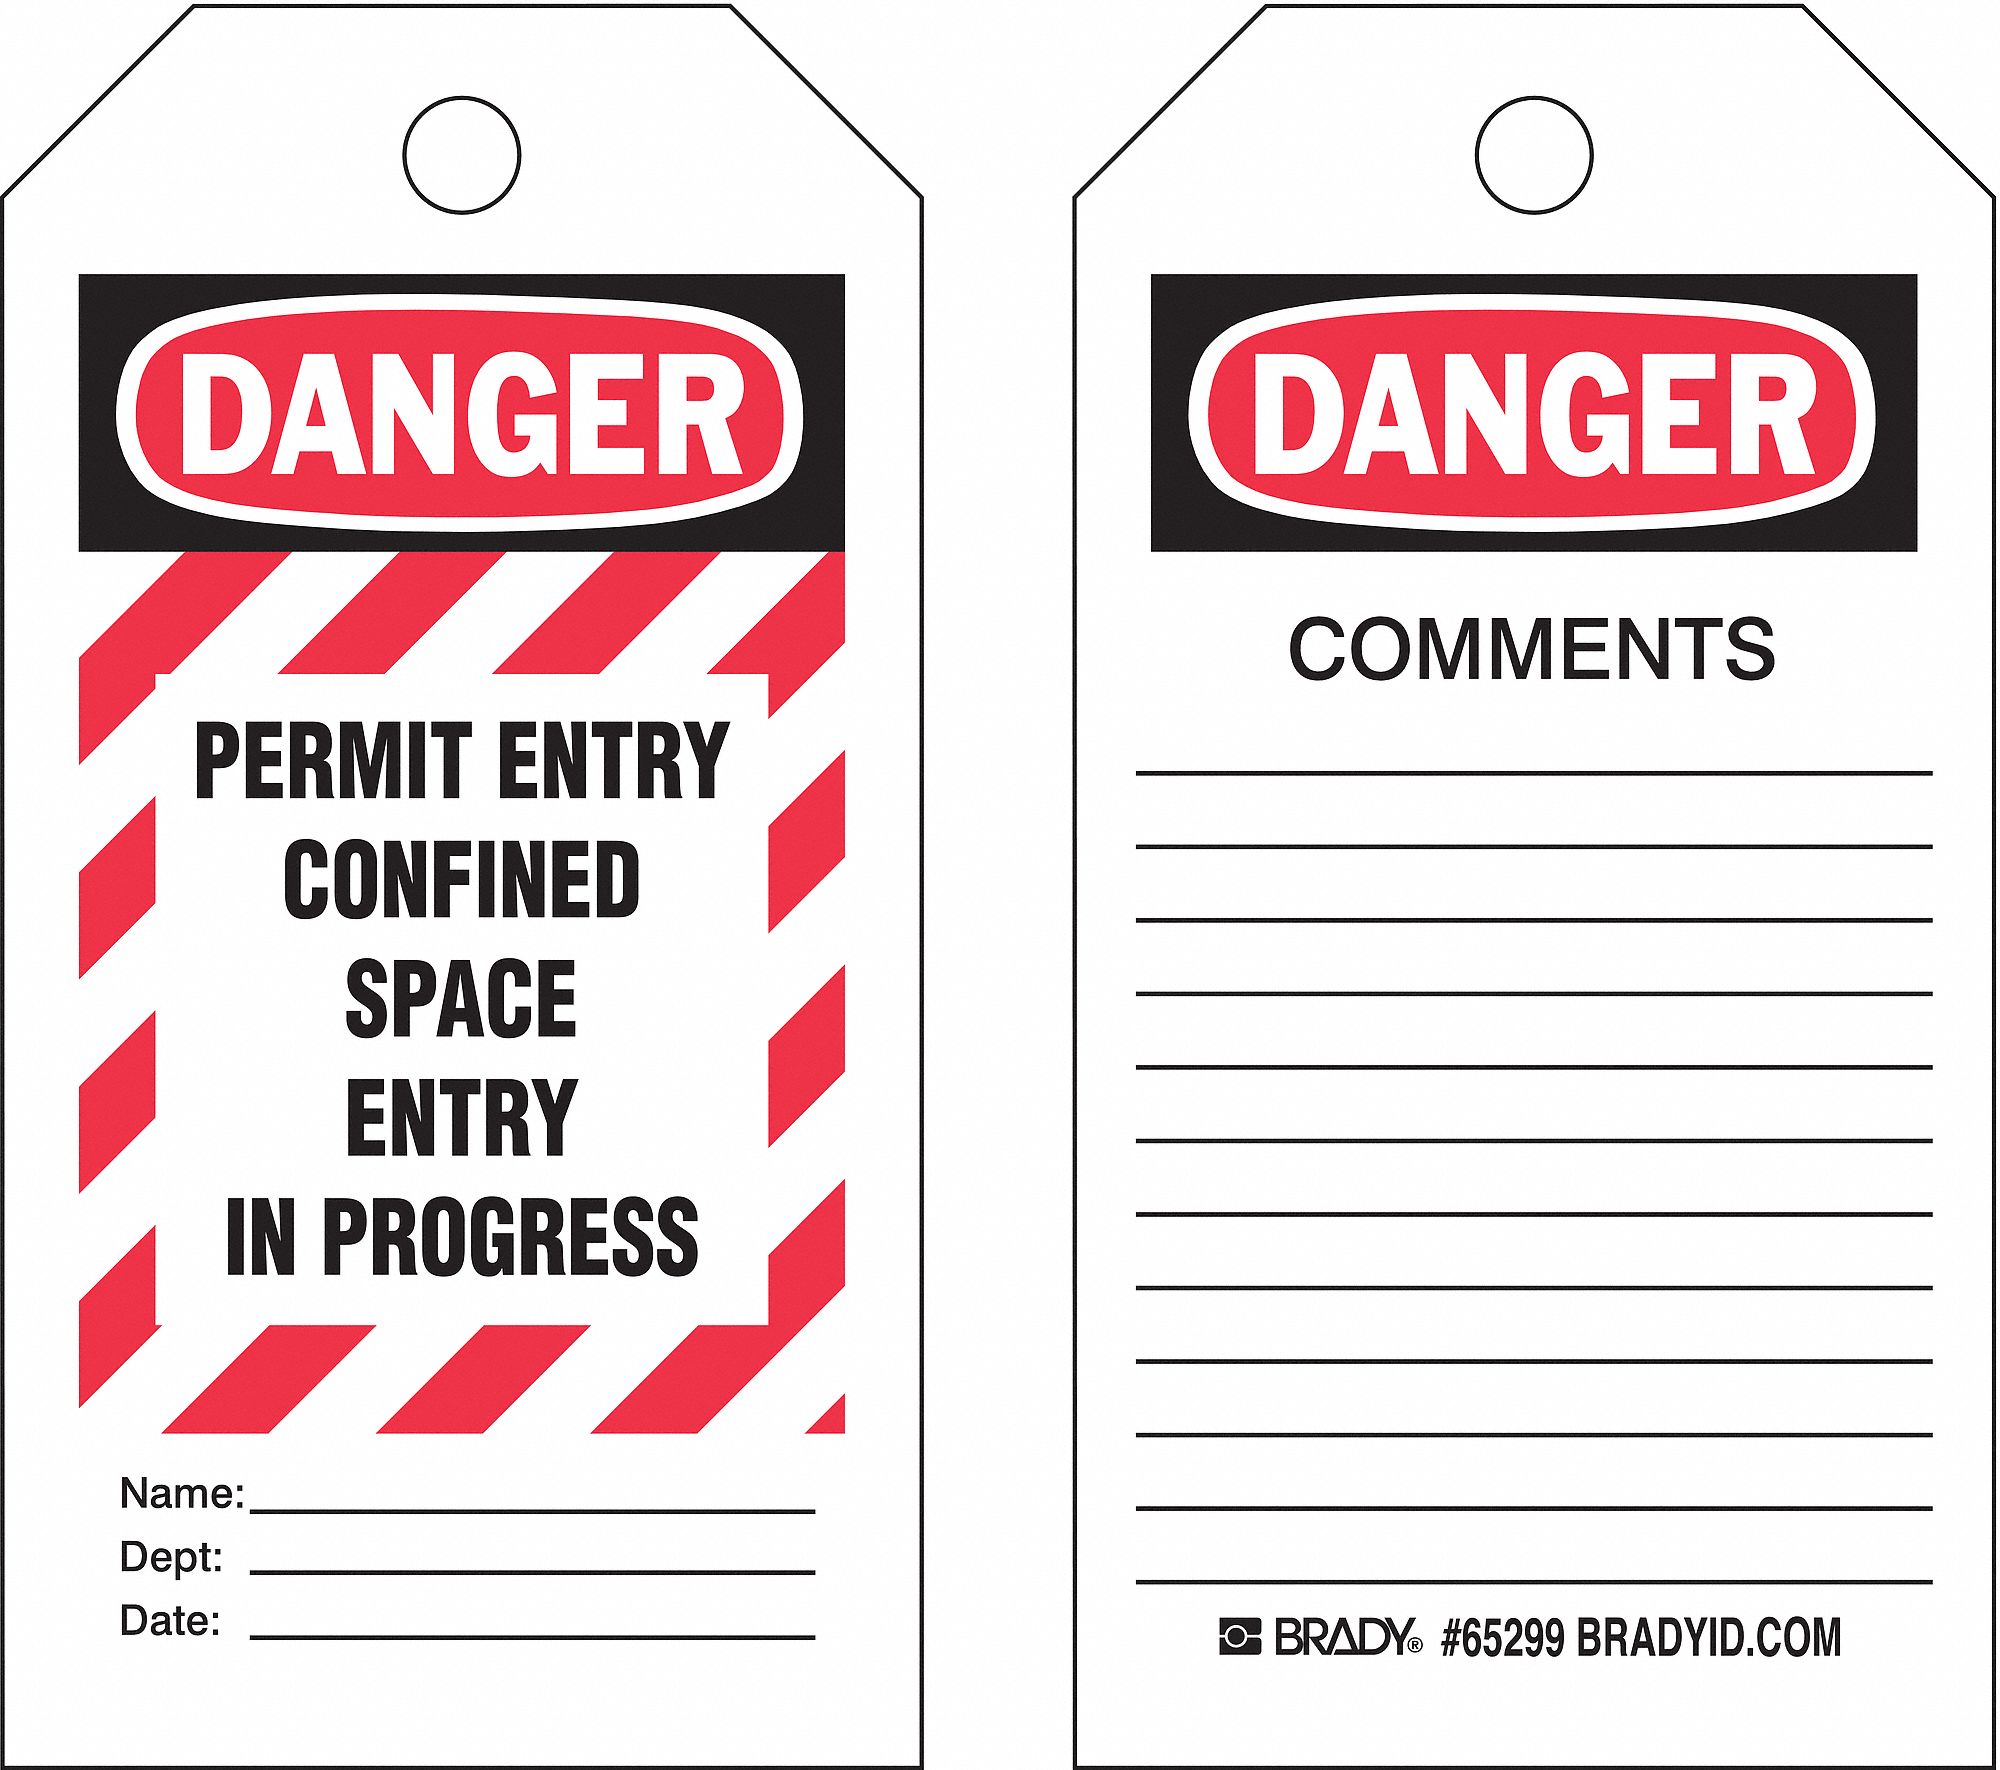 Economy PolyesterDanger Permit Entry Confined Space, Danger Tag 5-1/2